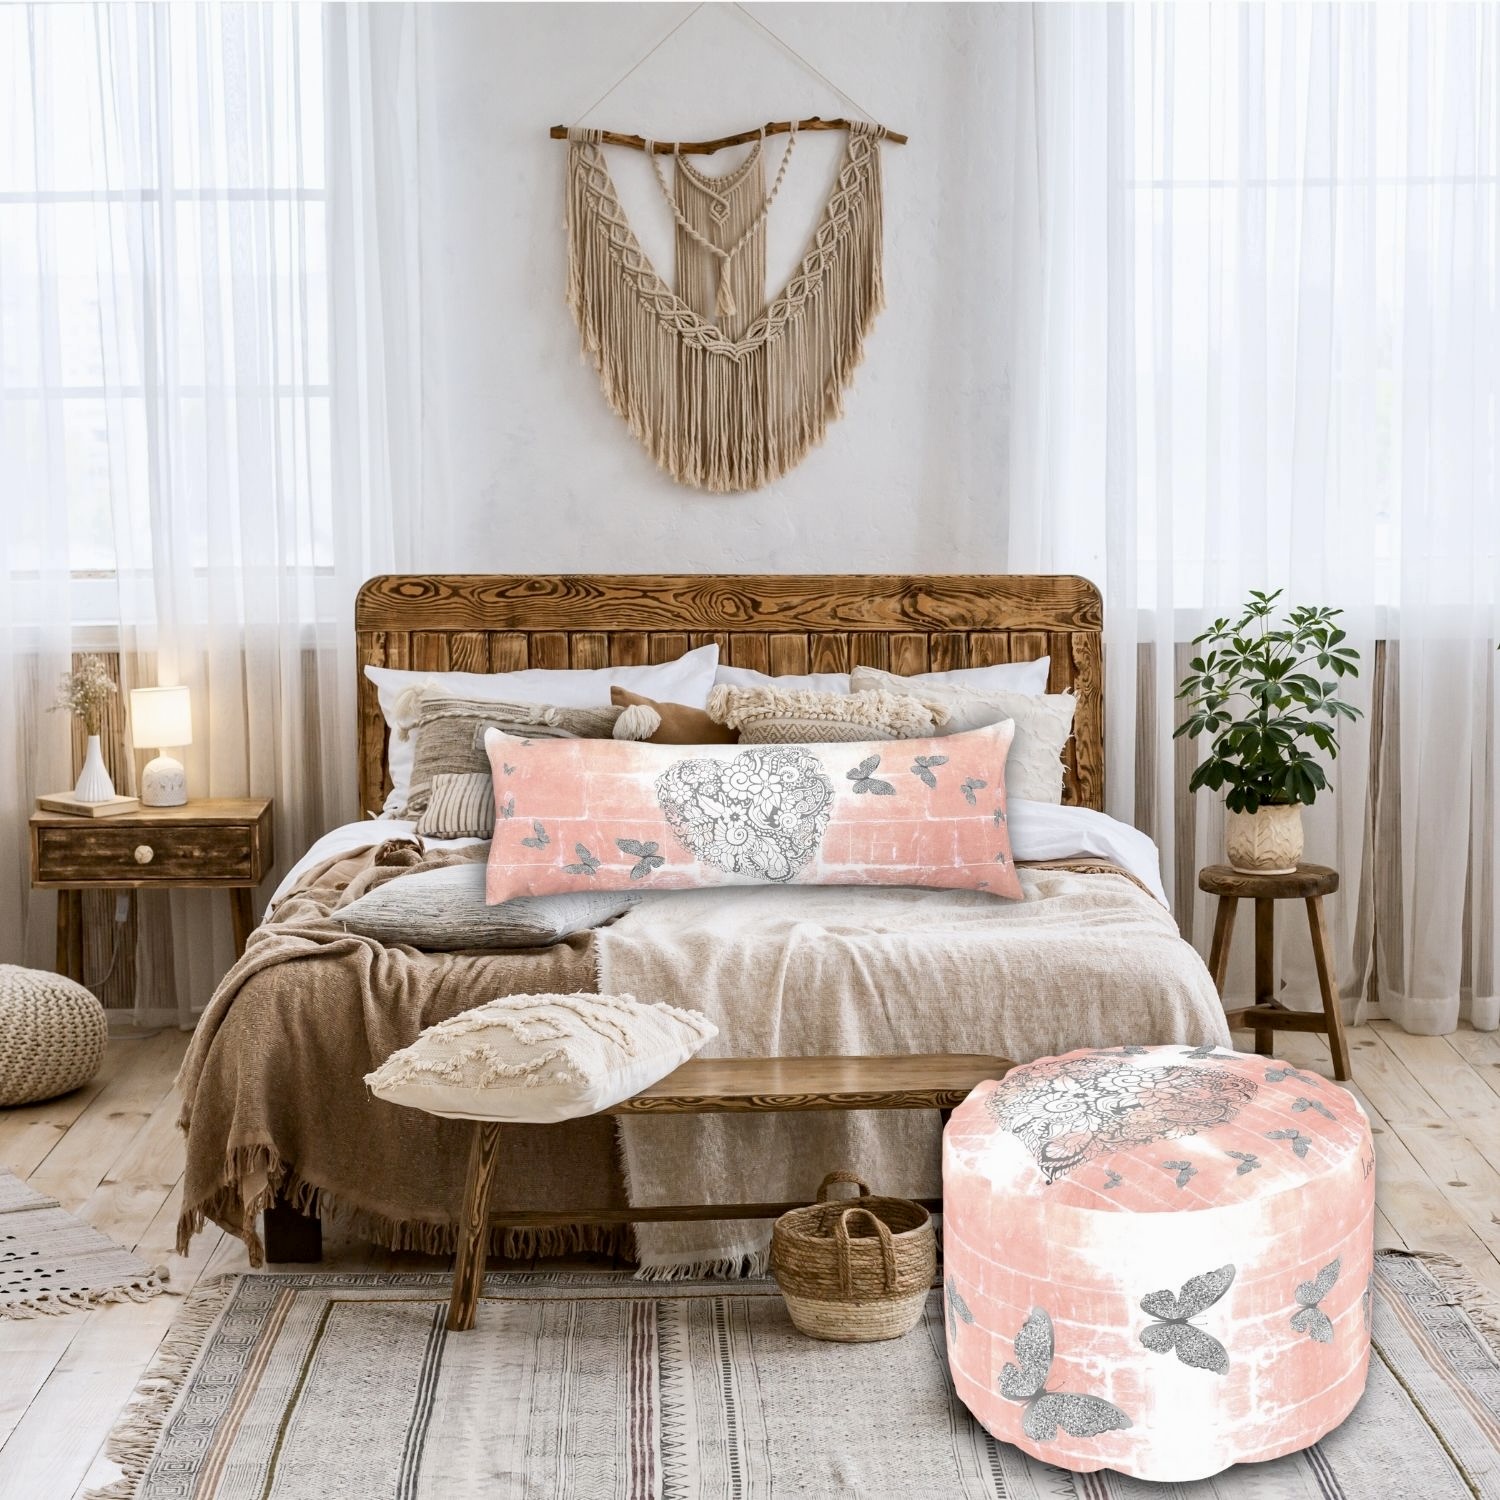 A body pillow and pouf featuring matching rustic peach designs, with a gray heart surrounded by silver butterflies, in a boho-style bedroom ambiance.